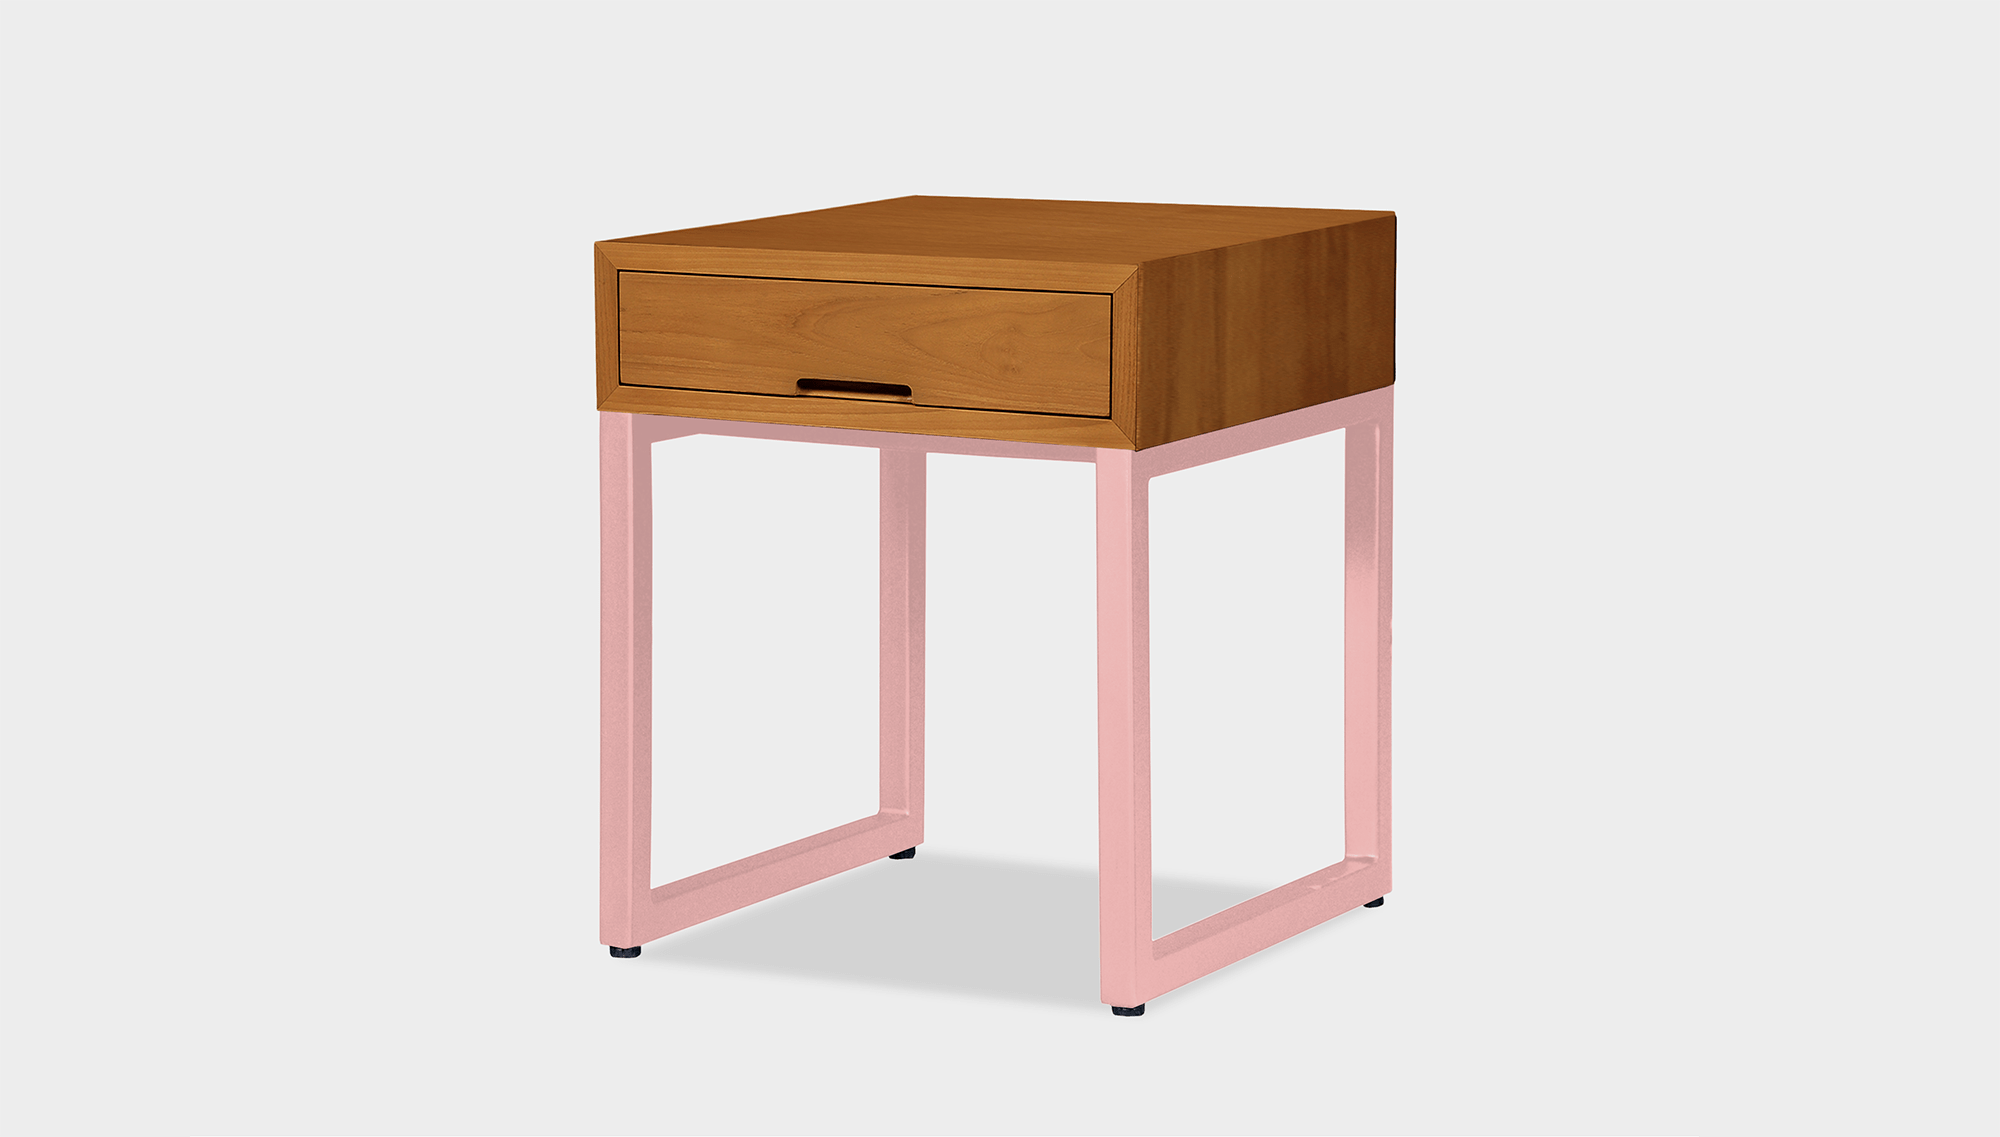 reddie-raw bedside table 45W x 45D x 55H *cm / Wood Teak~Natural / Metal~Pink Suzy Bedside Table High Square